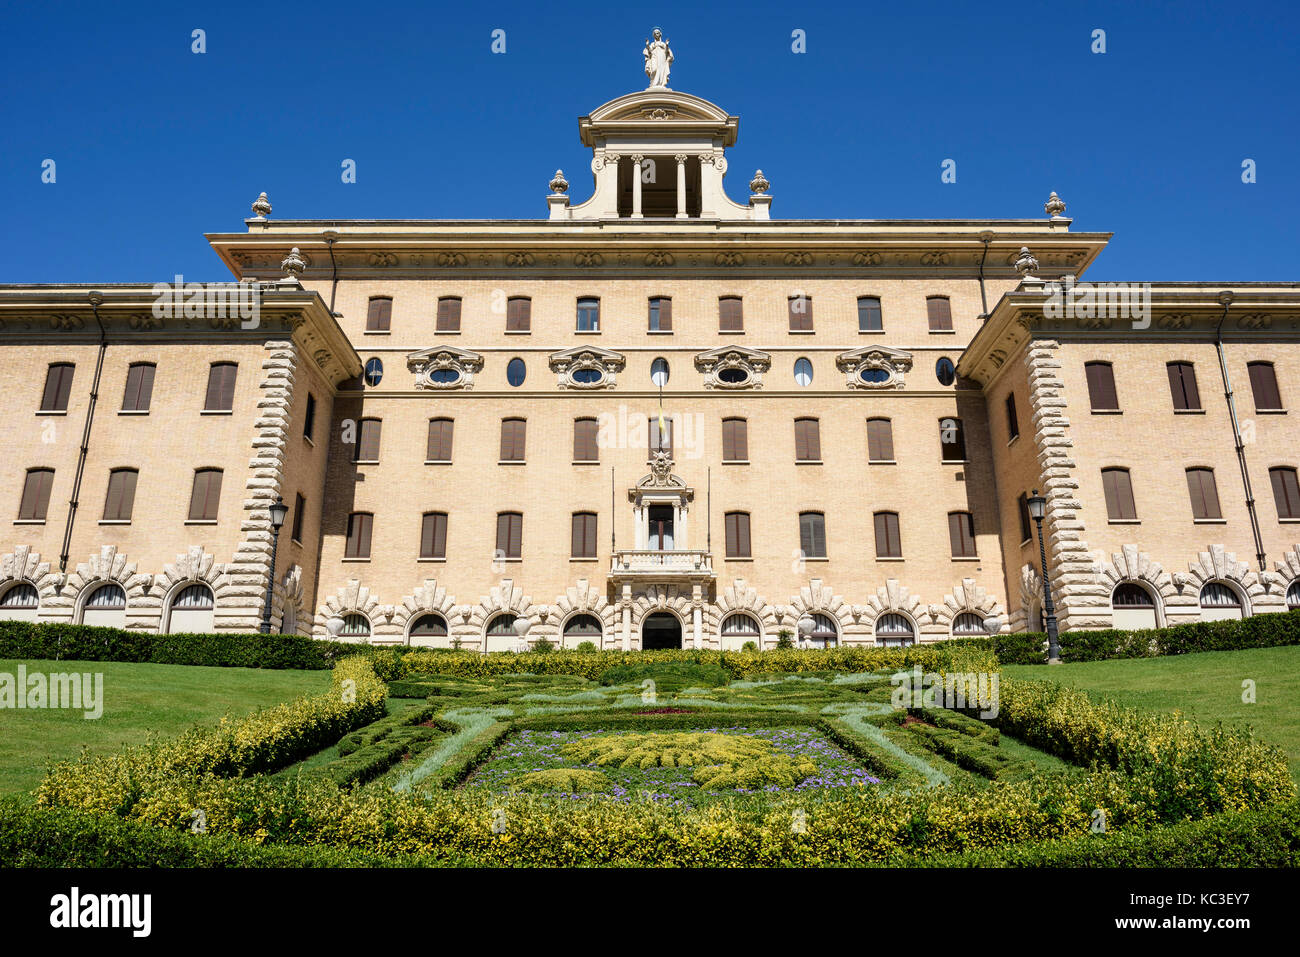 Rome. Italy. Palace of the Governorate (Palazzo del Governatorato) in the Vatican City. Stock Photo